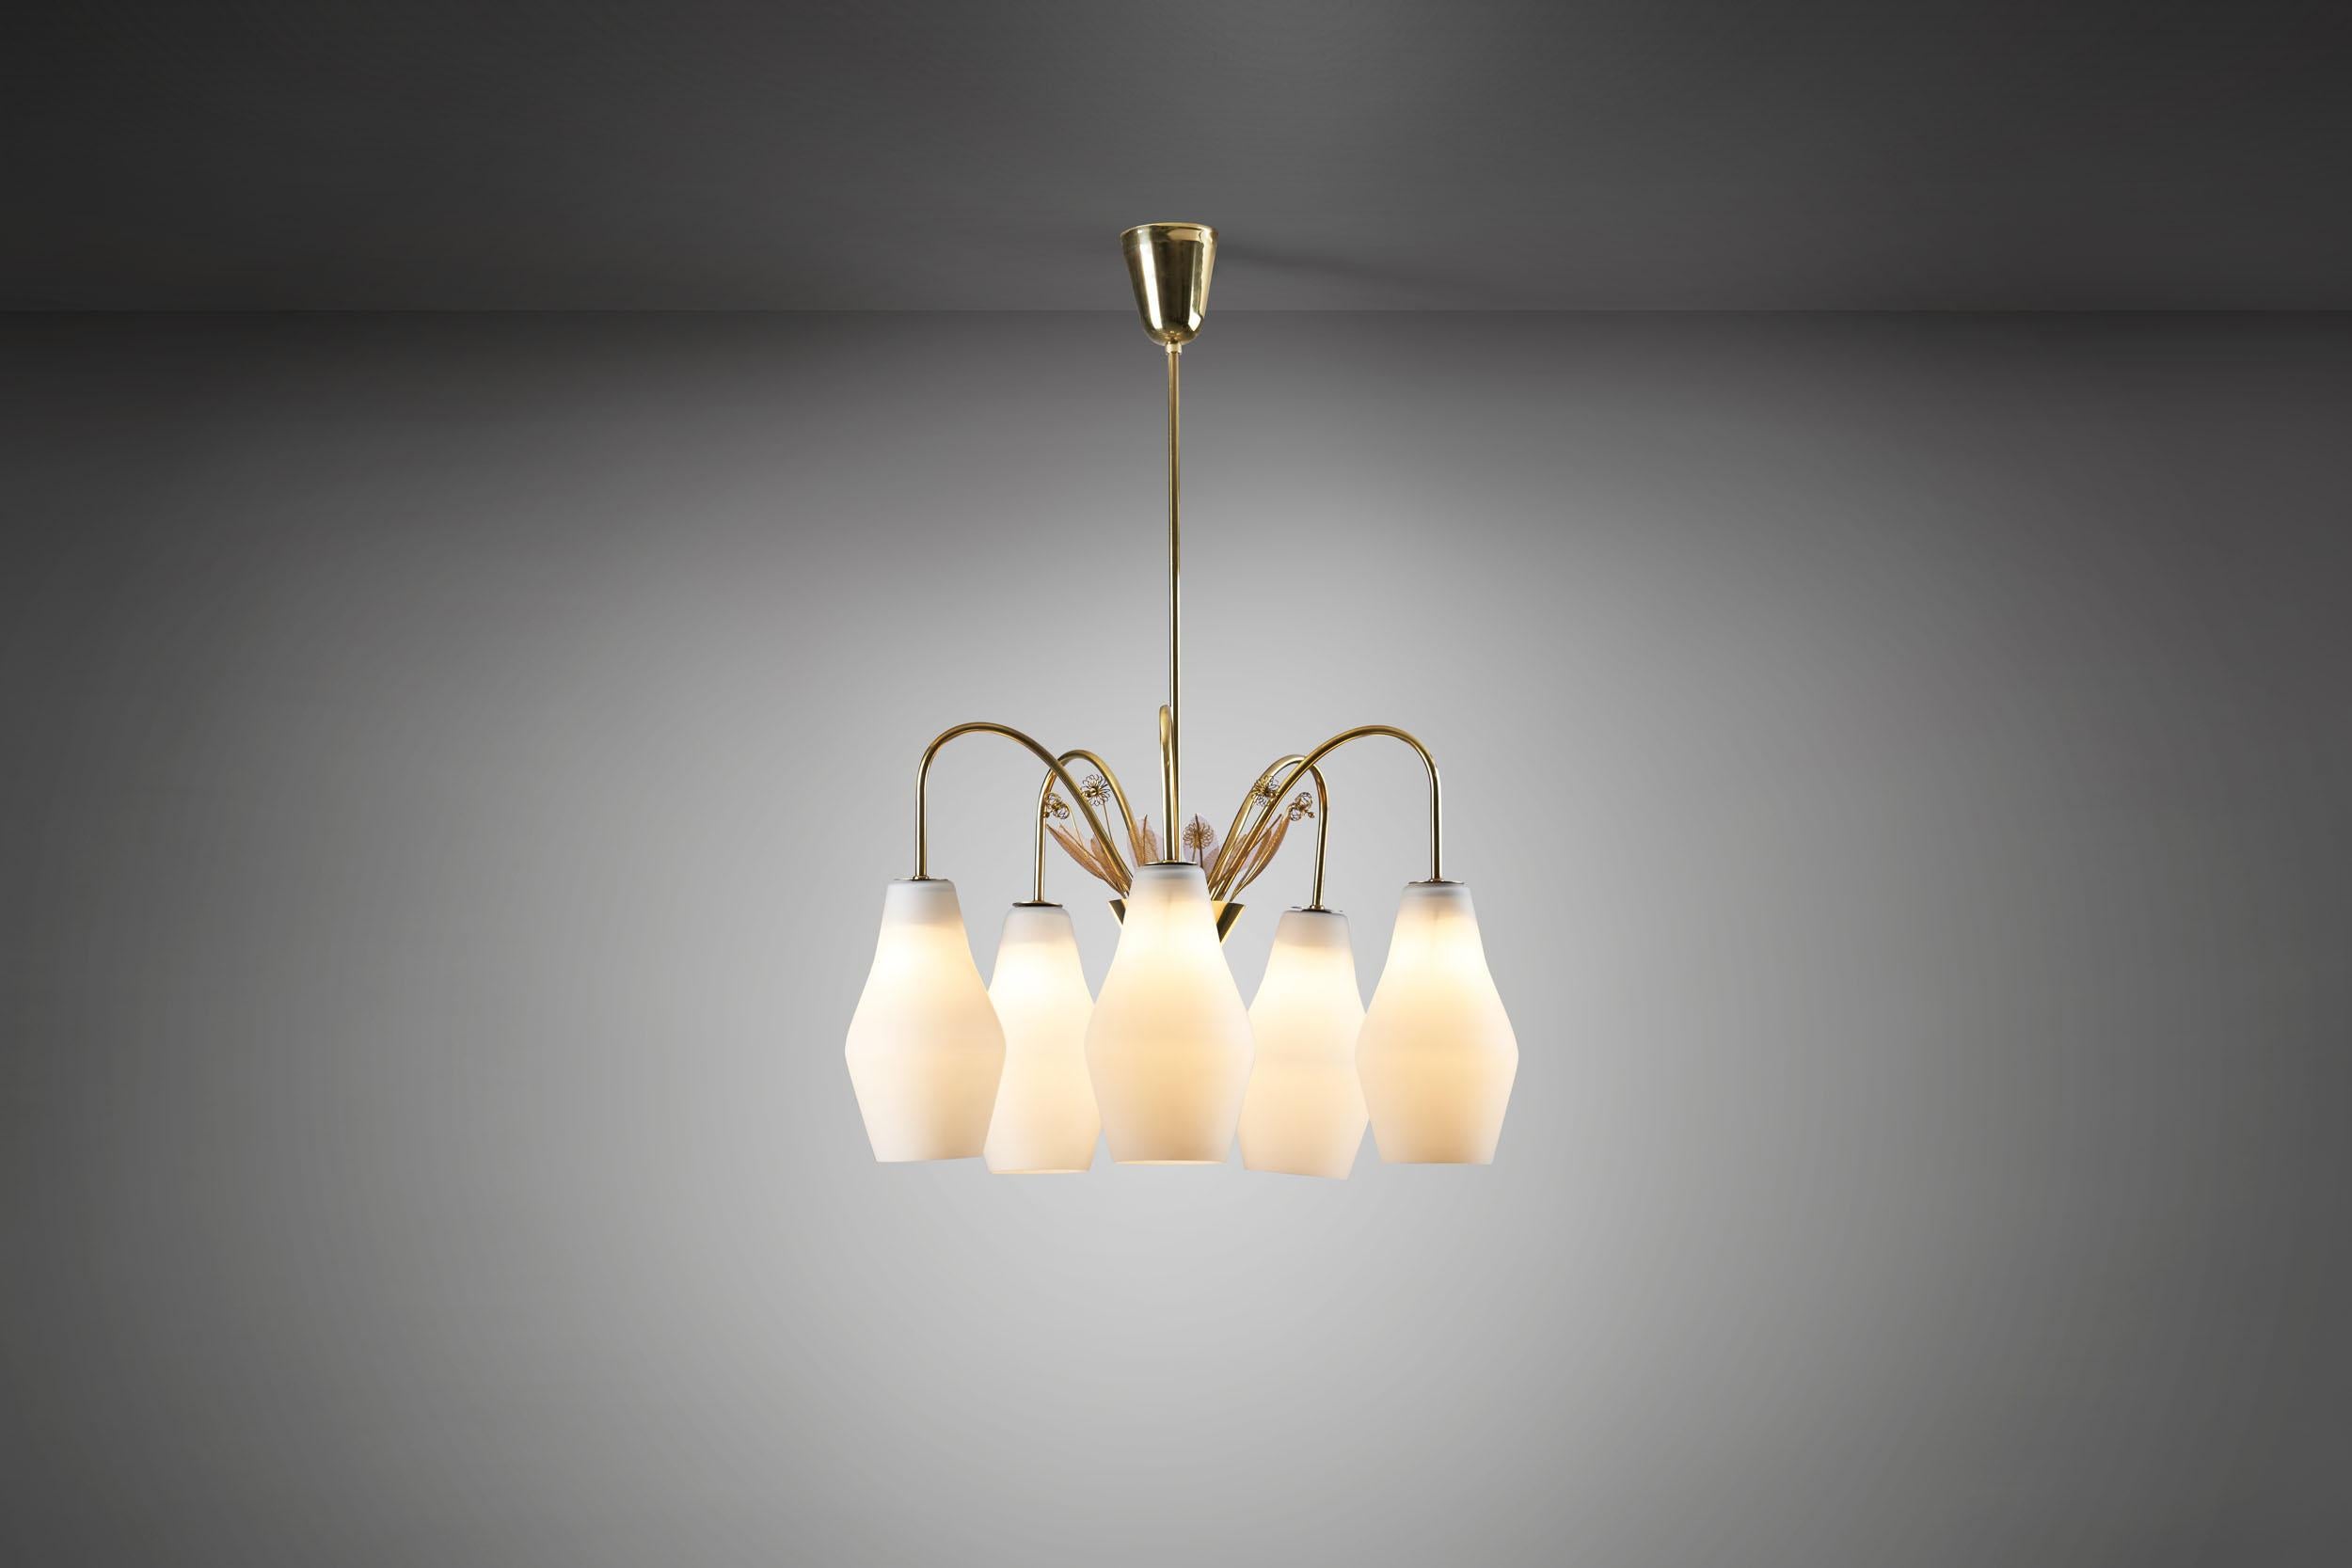 Mid-20th Century Paavo Tynell “K1-9/5” Ceiling Lamp for Idman Oy, Finland, 1950s For Sale